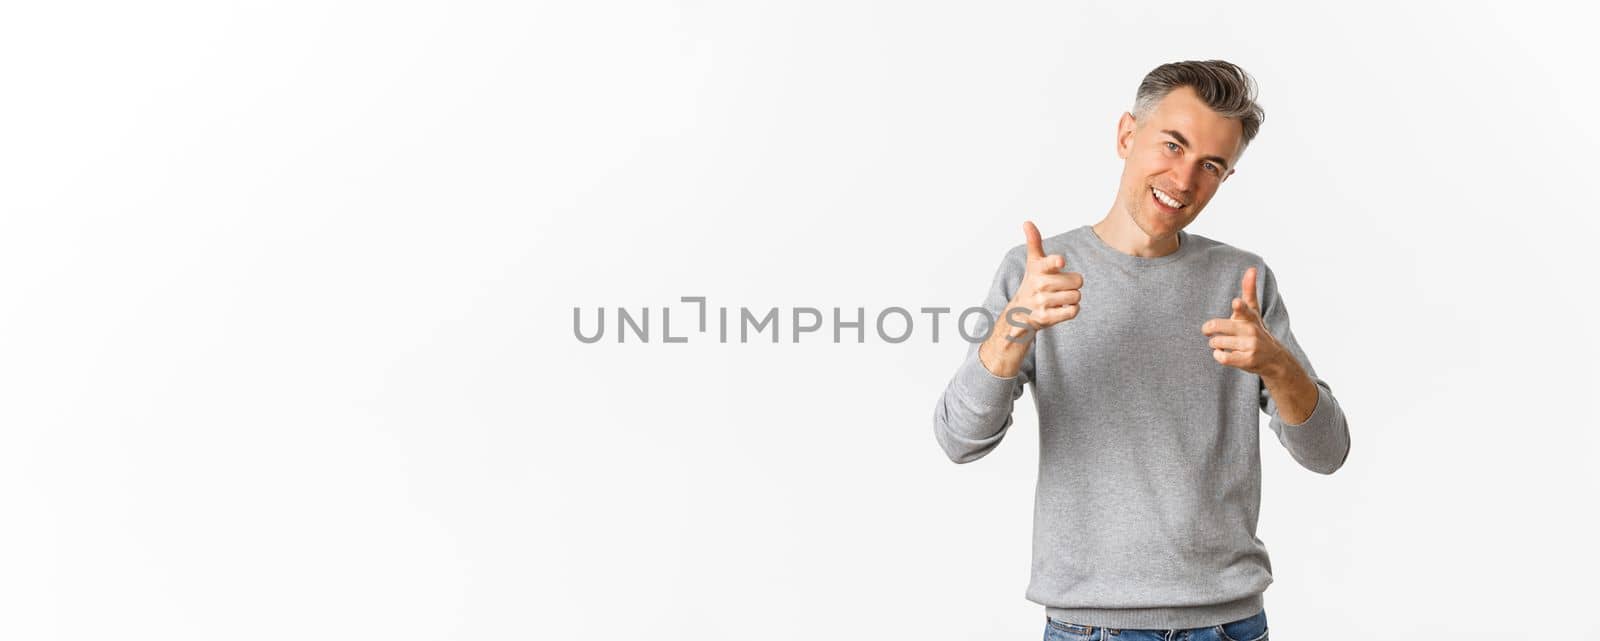 Portrait of handsome and confident middle-aged man, showing thumbs-up and smiling satisfied, approve and like something good, standing over white background.